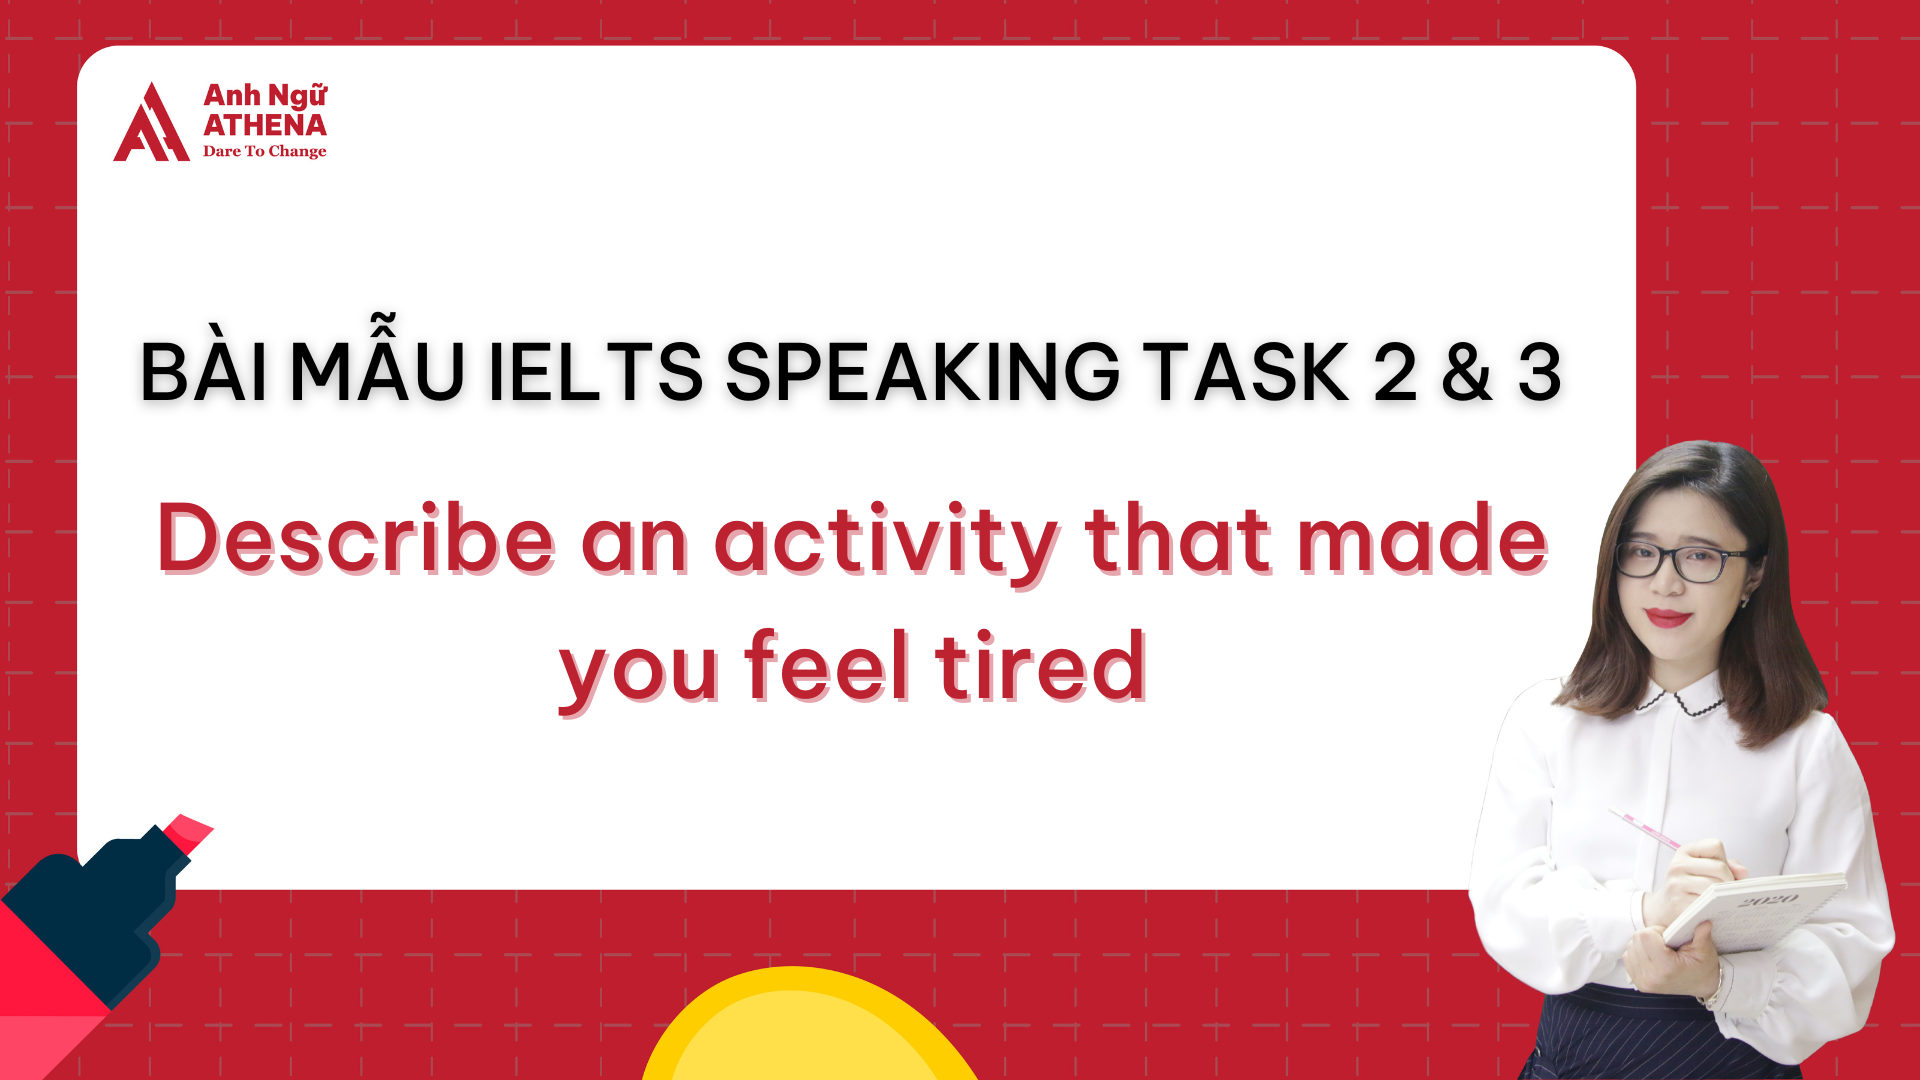 Describe an activity that made you feel tired